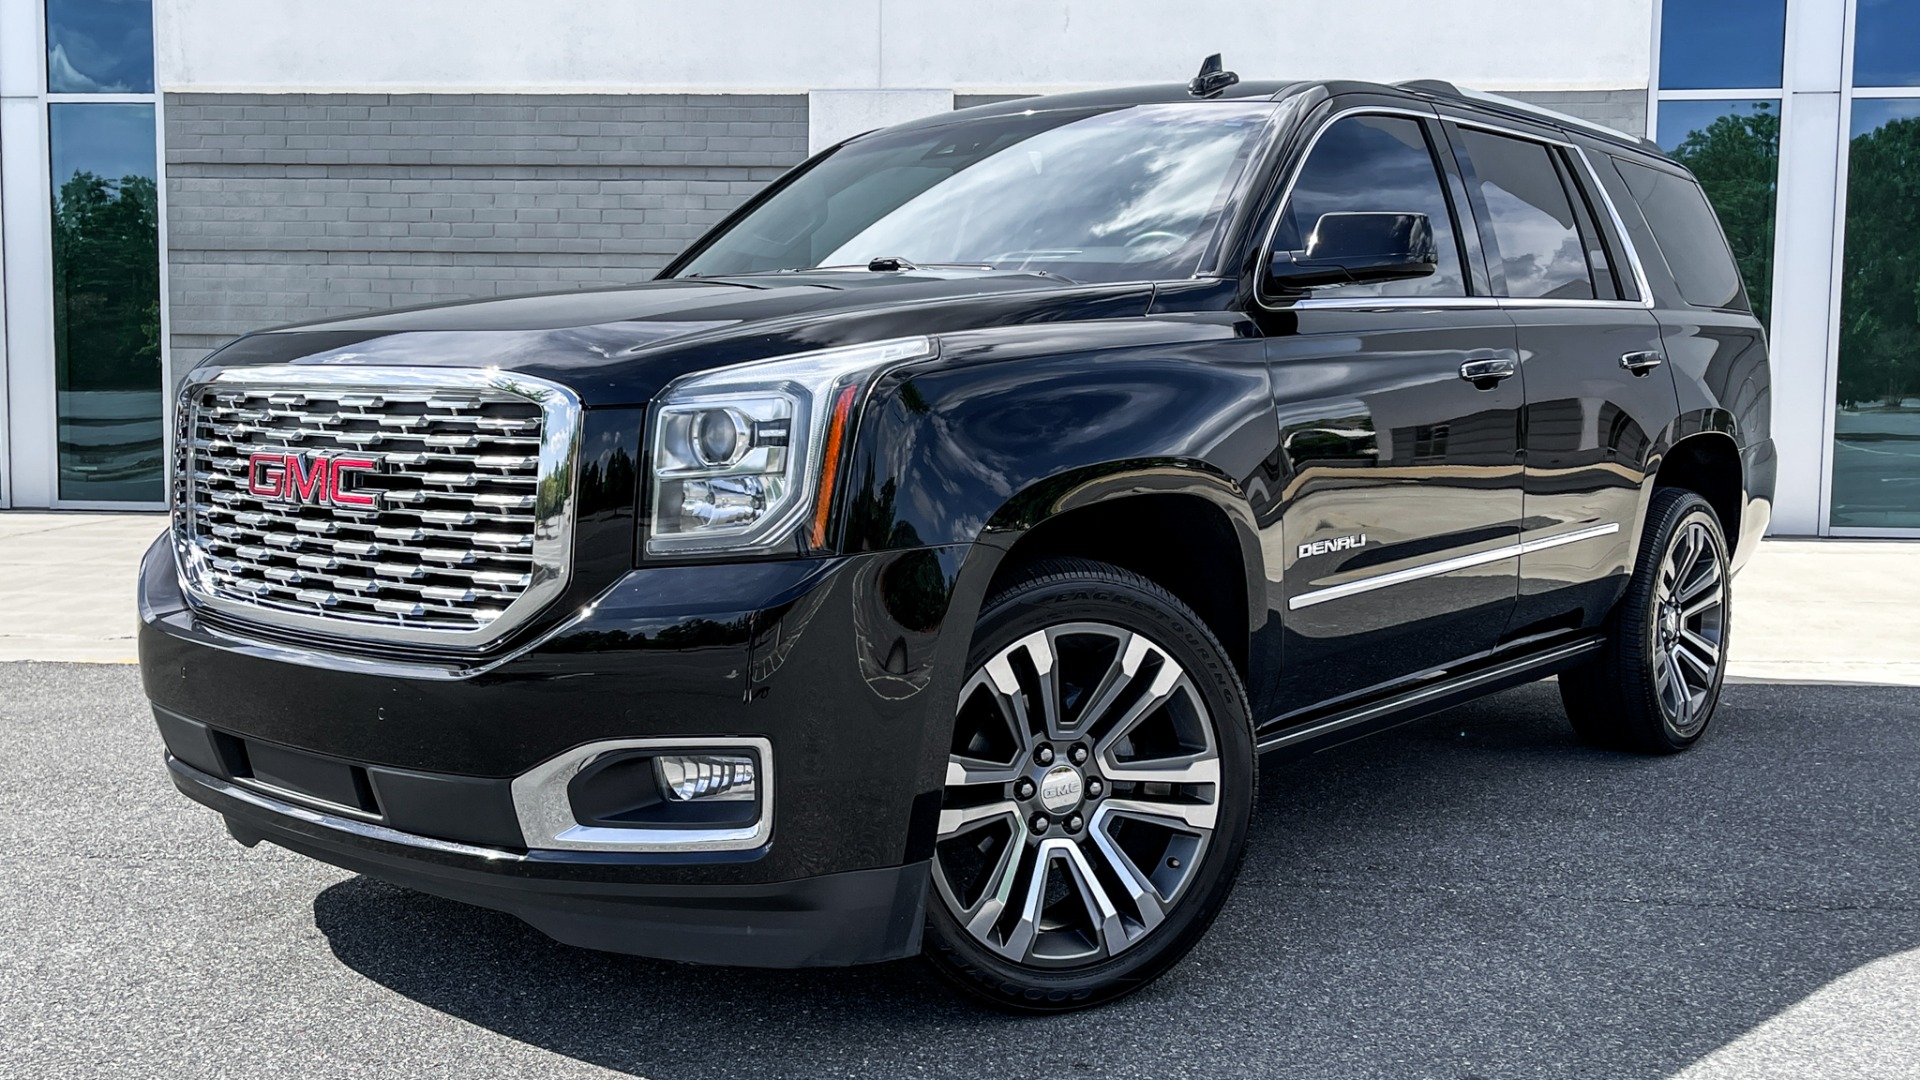 Used 2019 GMC Yukon DENALI / ULTIMATE PACKAGE / DVD / 4X4 / ADAPTIVE CRUISE / SUNROOF for sale $58,295 at Formula Imports in Charlotte NC 28227 1